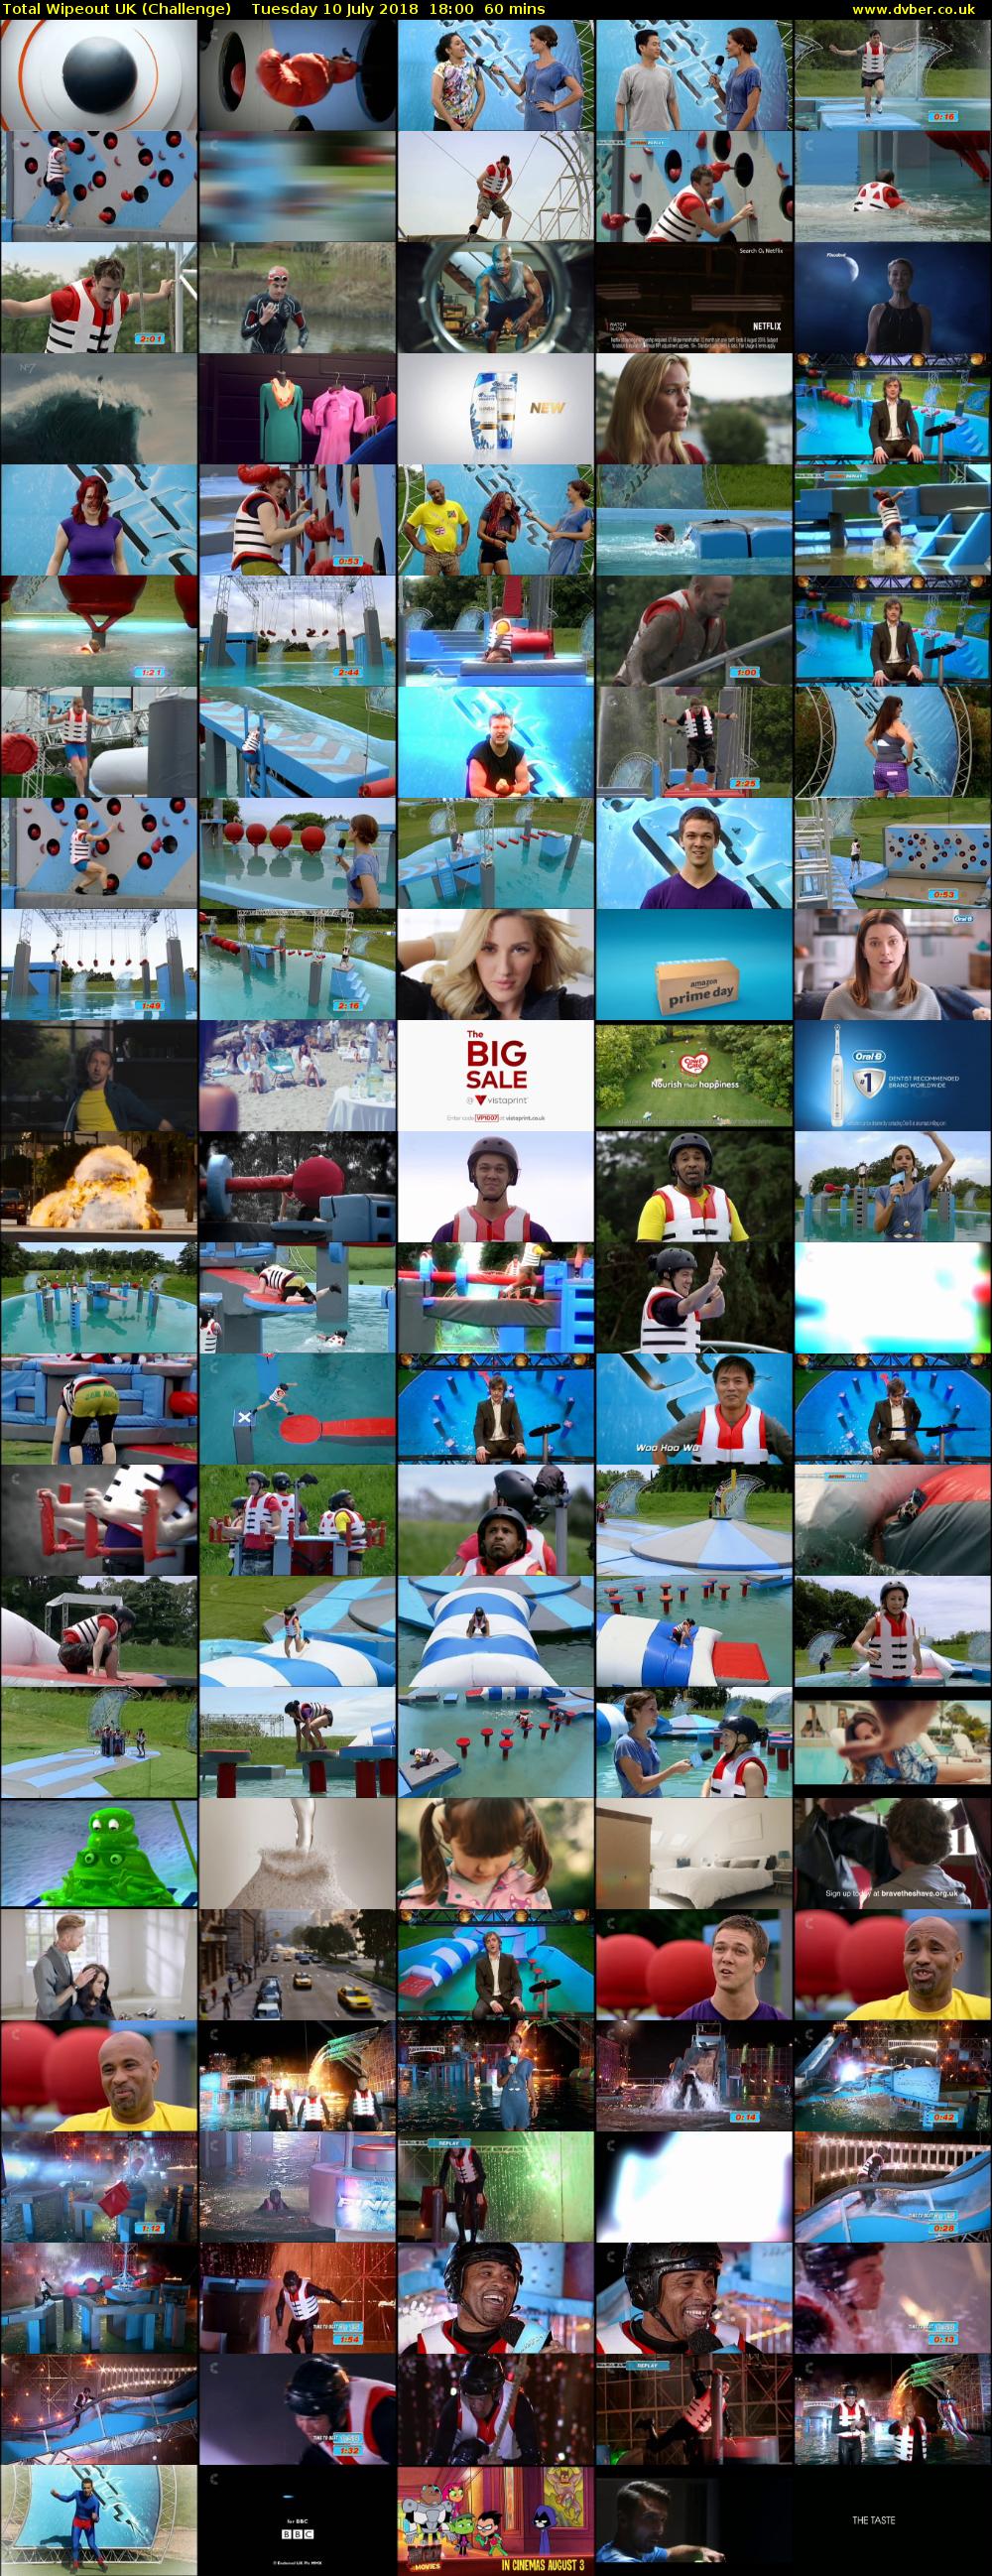 Total Wipeout UK (Challenge) Tuesday 10 July 2018 18:00 - 19:00